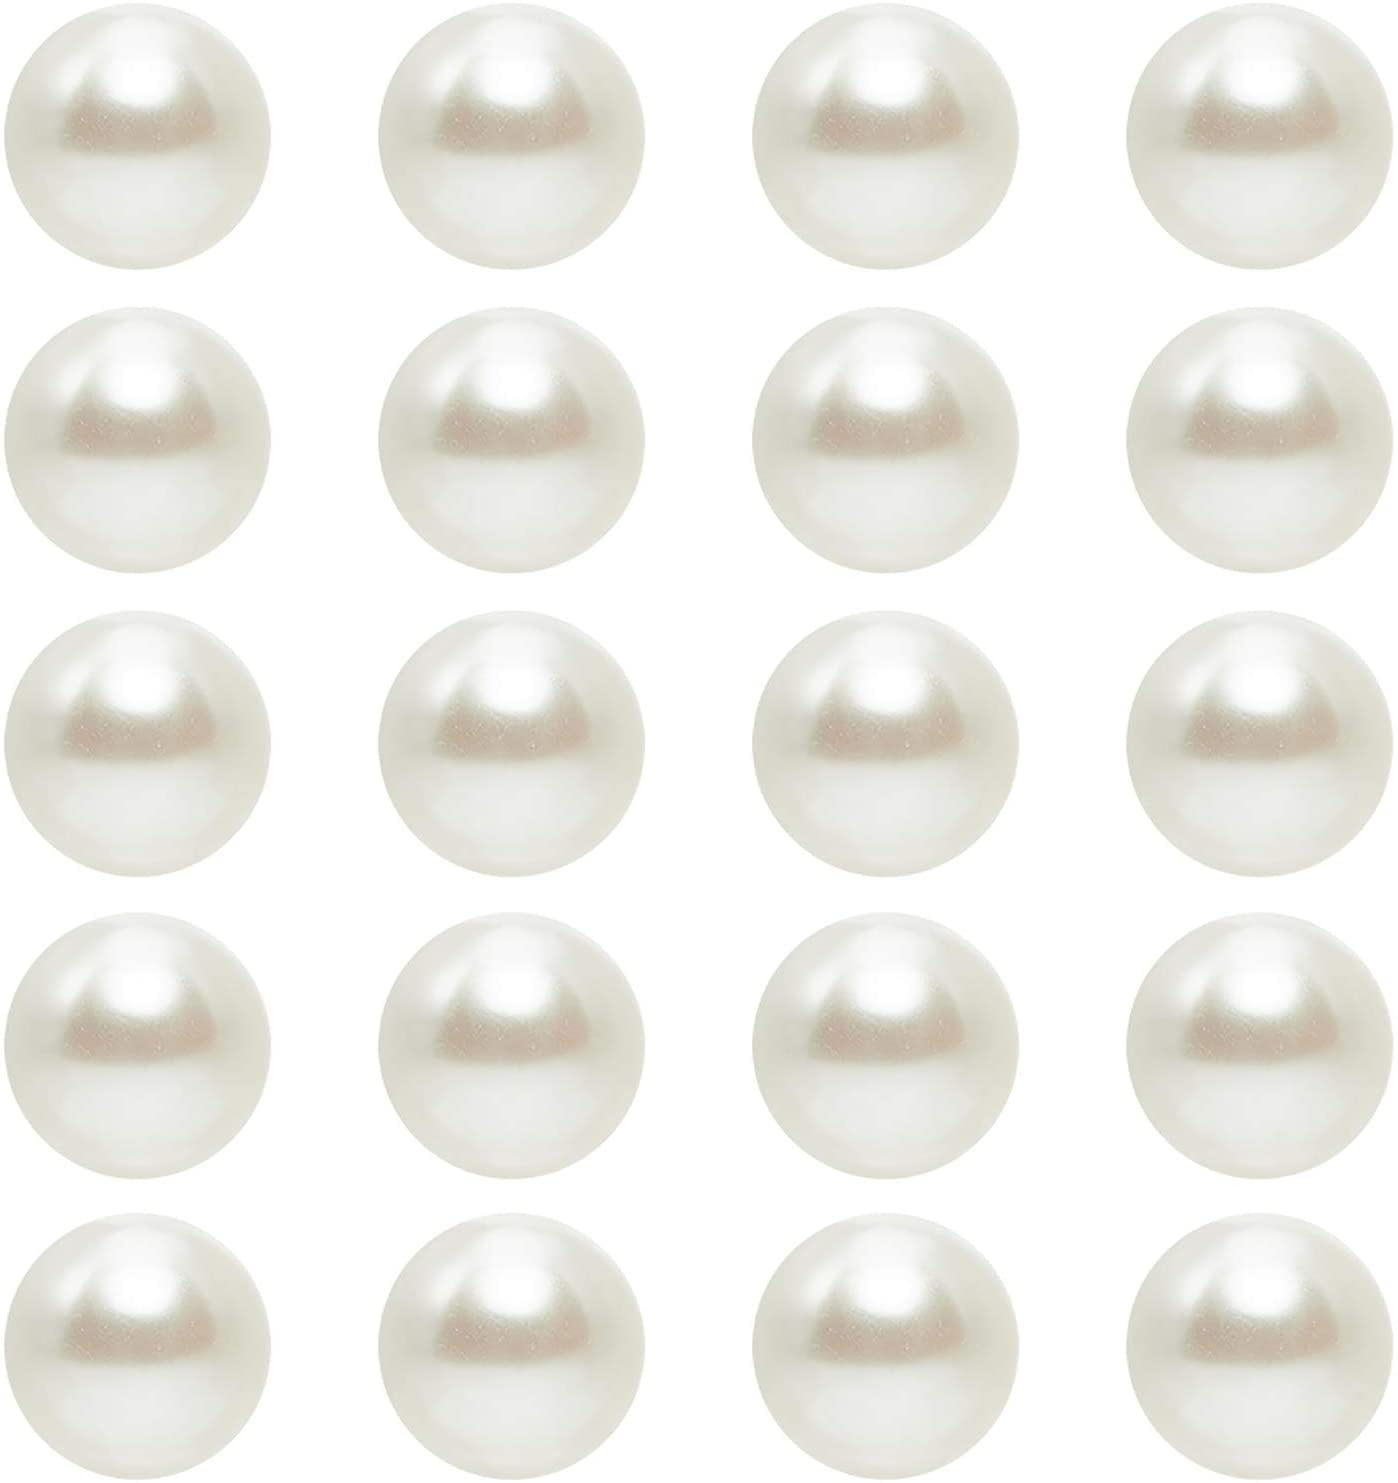 Feildoo Faux Pearl Beads, Orange Yellow 6mm ABS Pearl Craft Beads Loose  Pearls for Jewelry Making, Crafts, Decoration and Vase Filler -250g